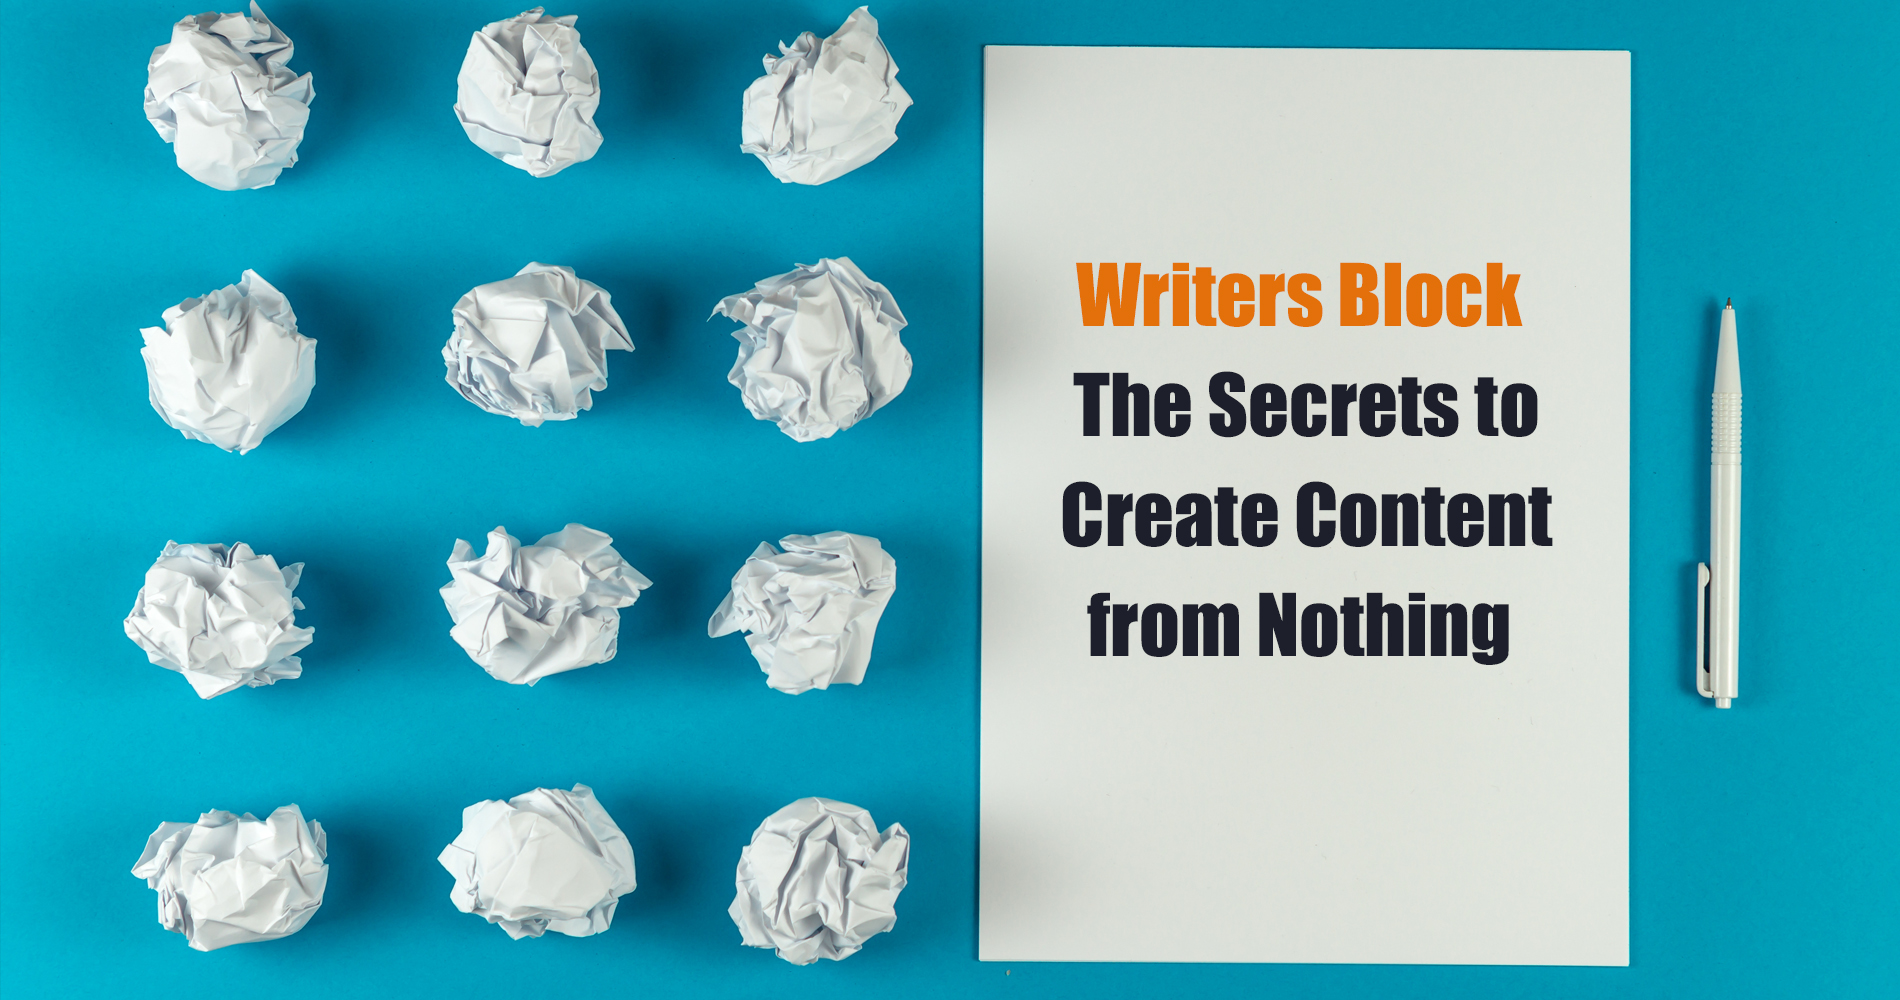 Writers Block - The Secrets to Create Content from Nothing 